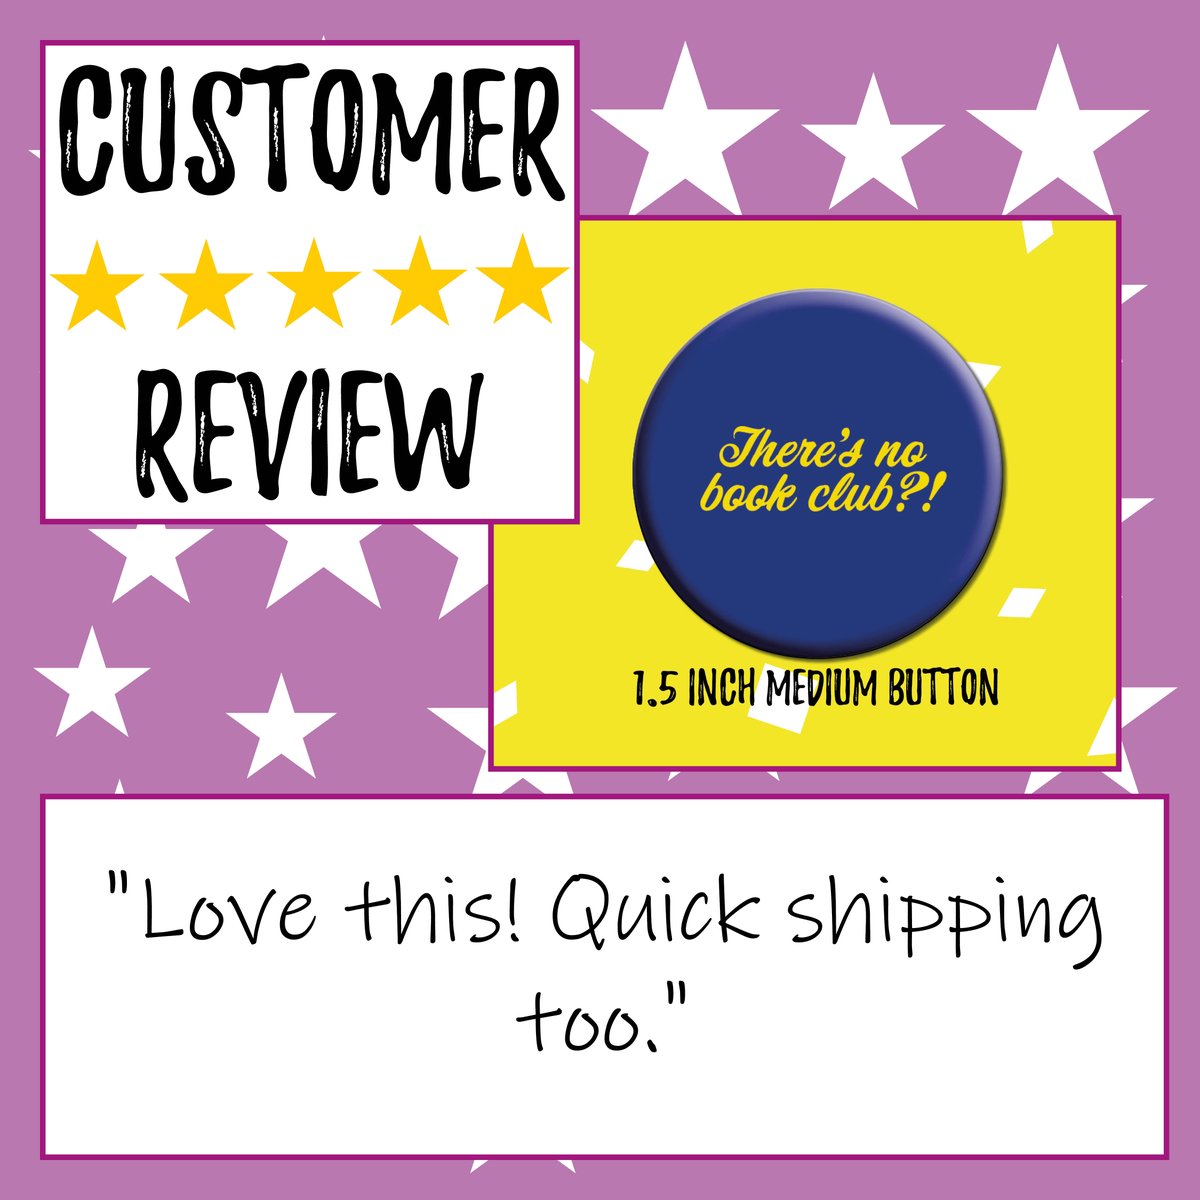 Thank you for the 5* review! All my buttons/badges are designed by me and handmade by me too - so these reviews mean a lot! 😍

#Yellowjackets #Handmadebusiness